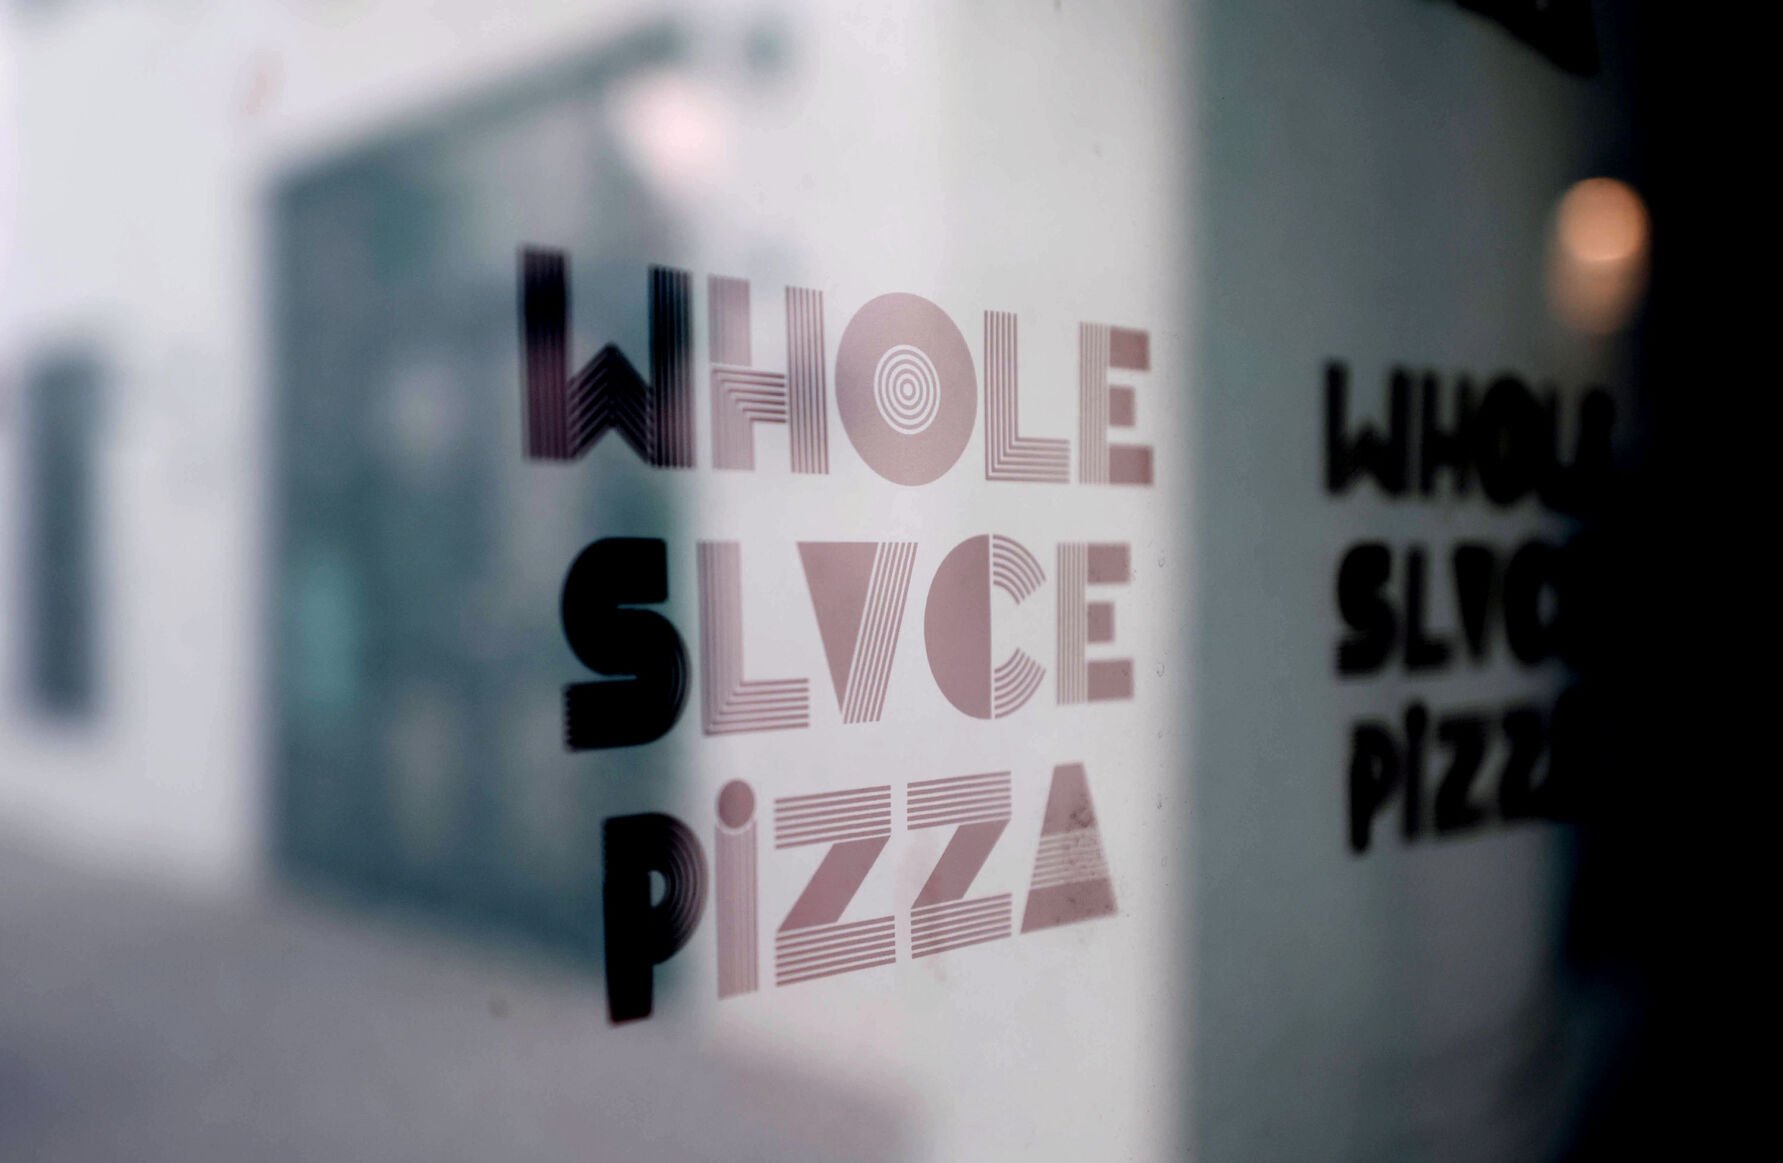 New pizzeria Whole Slvce opens on the west side this April